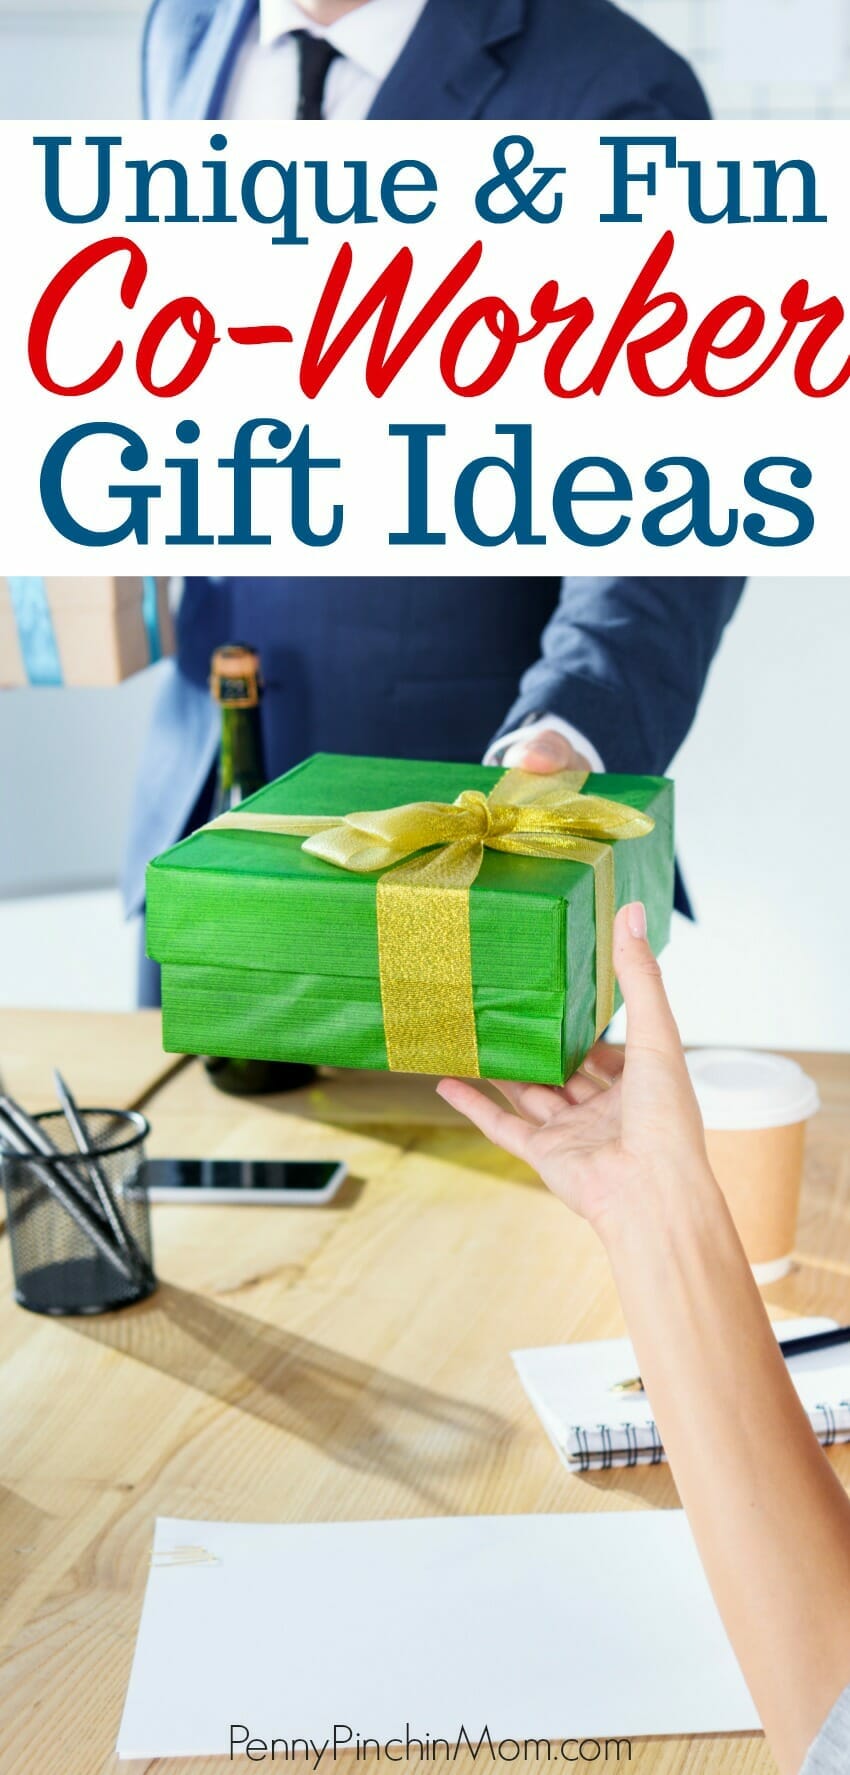 CoWorker Gift Ideas for Anyone on Your List This Year